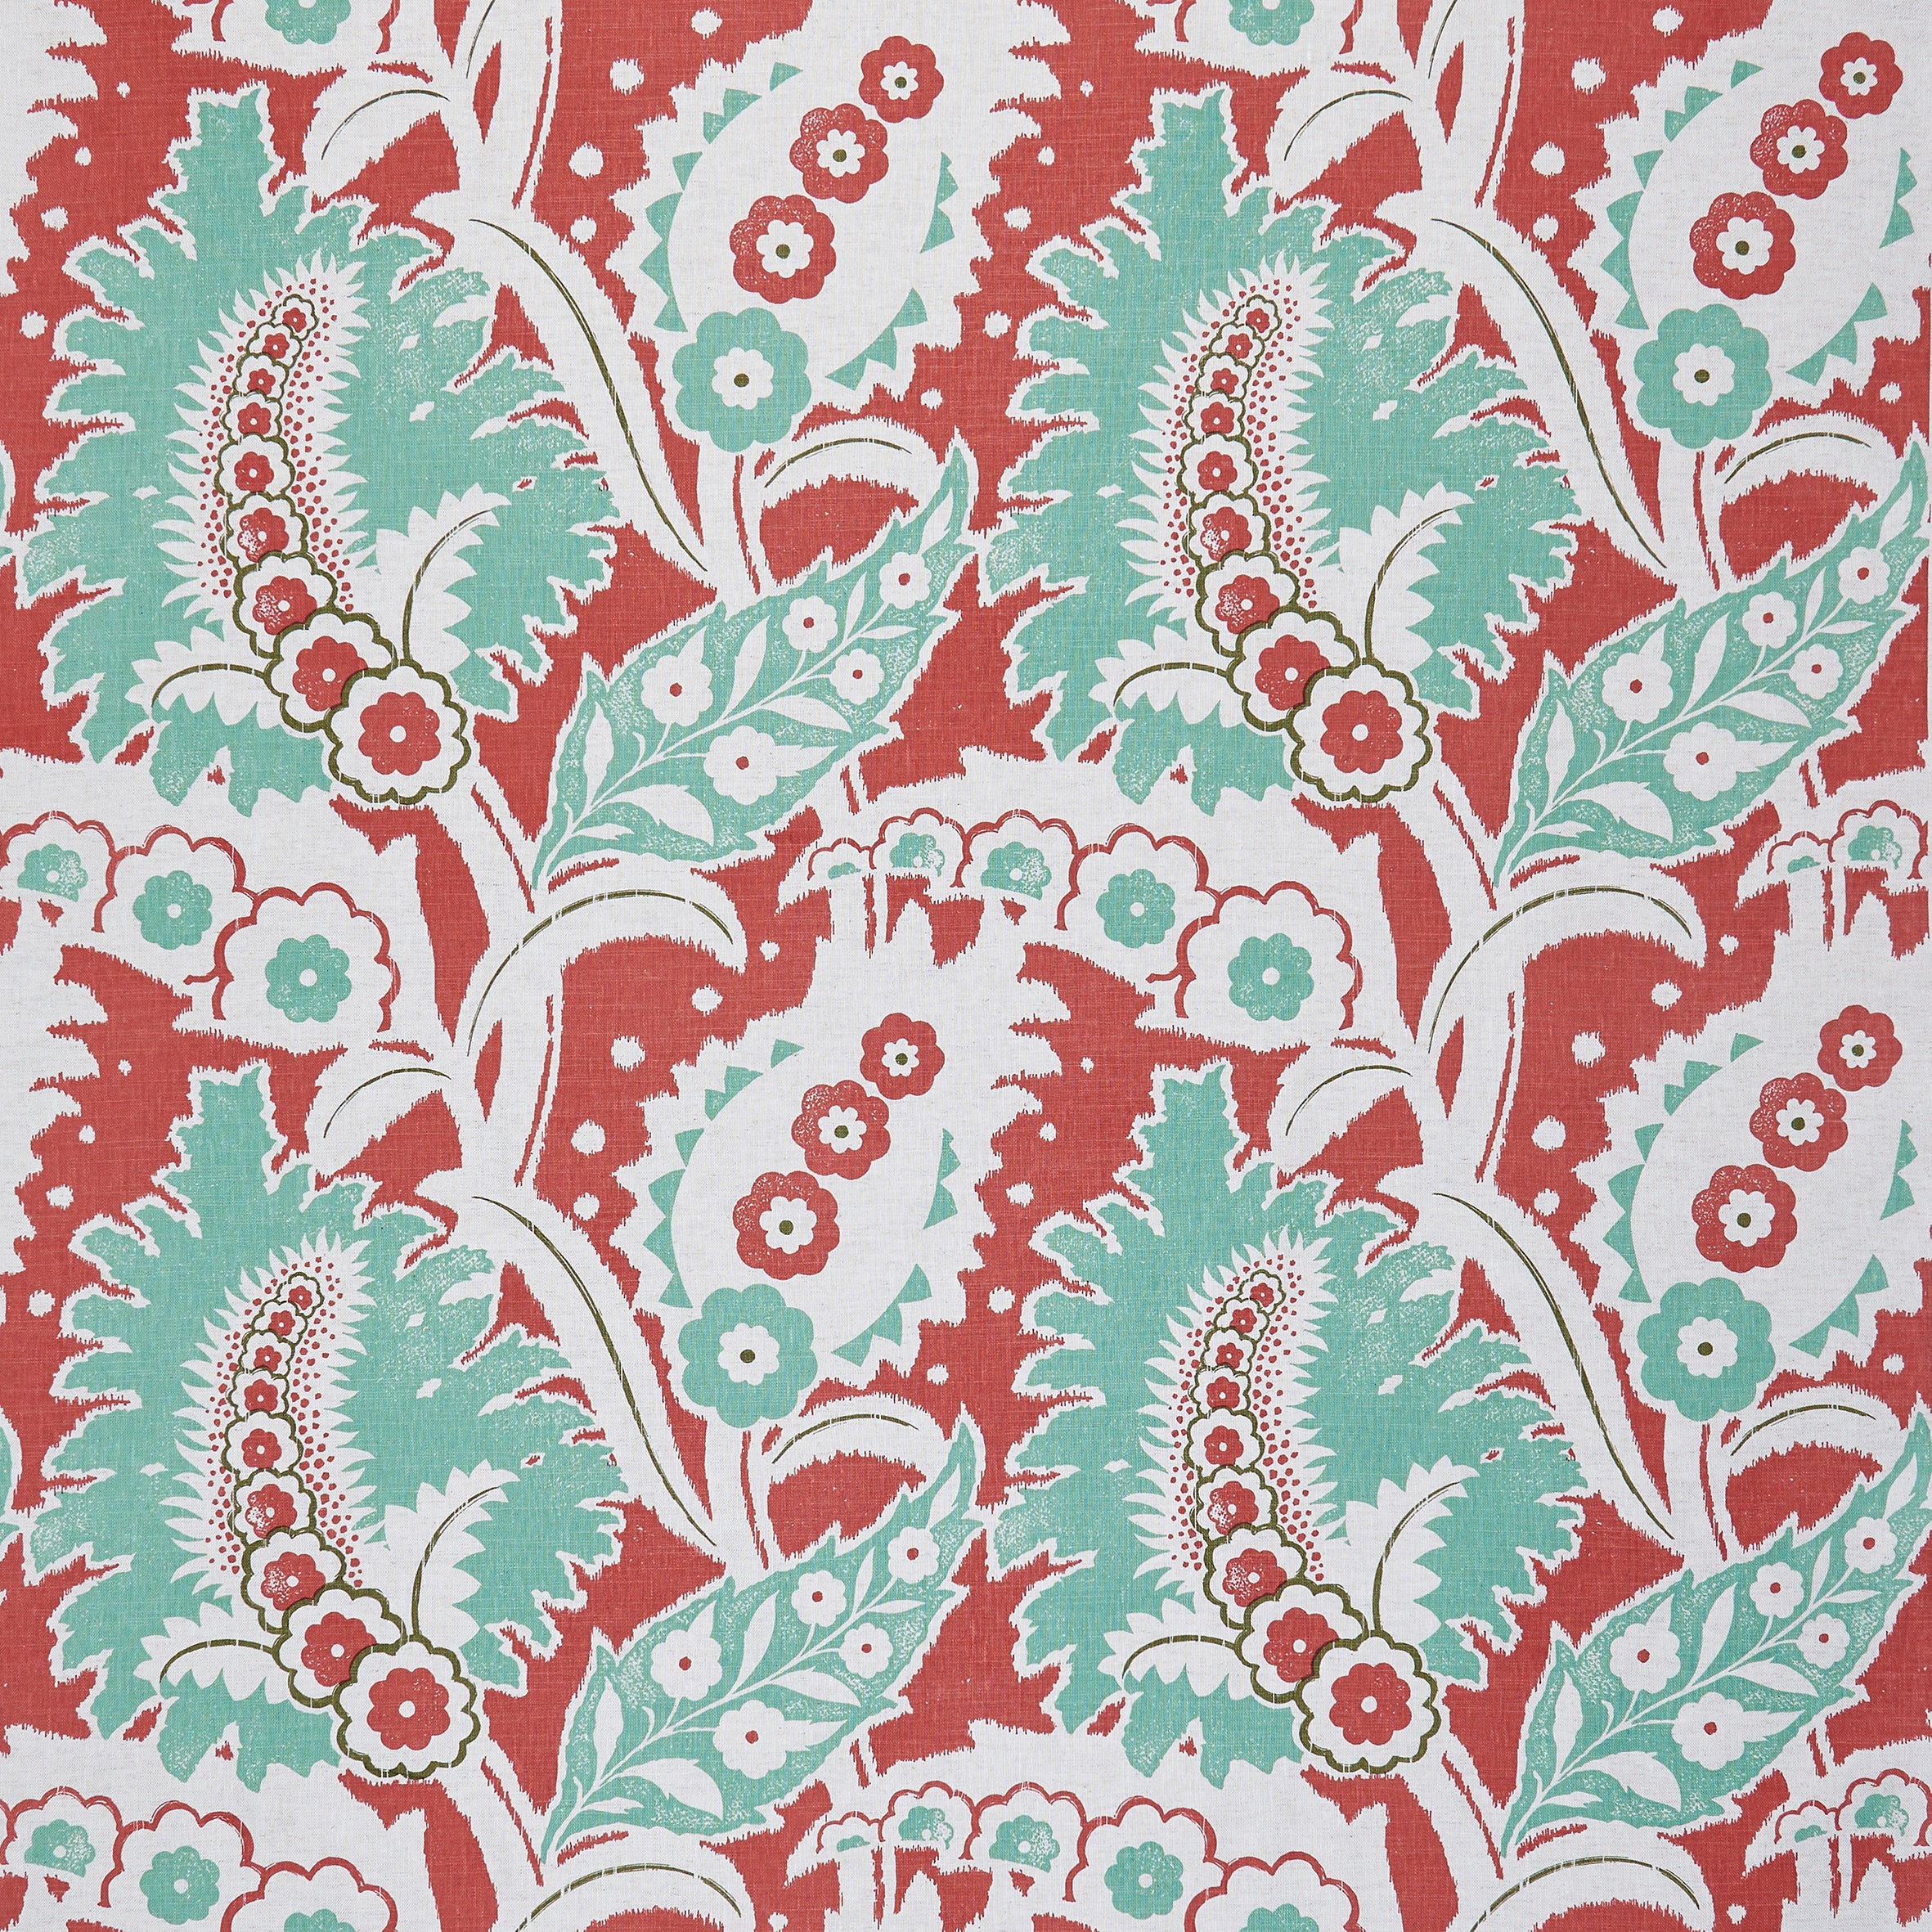 Detail of fabric in a botanical paisley print in shades of white, turquoise and green on a red field.